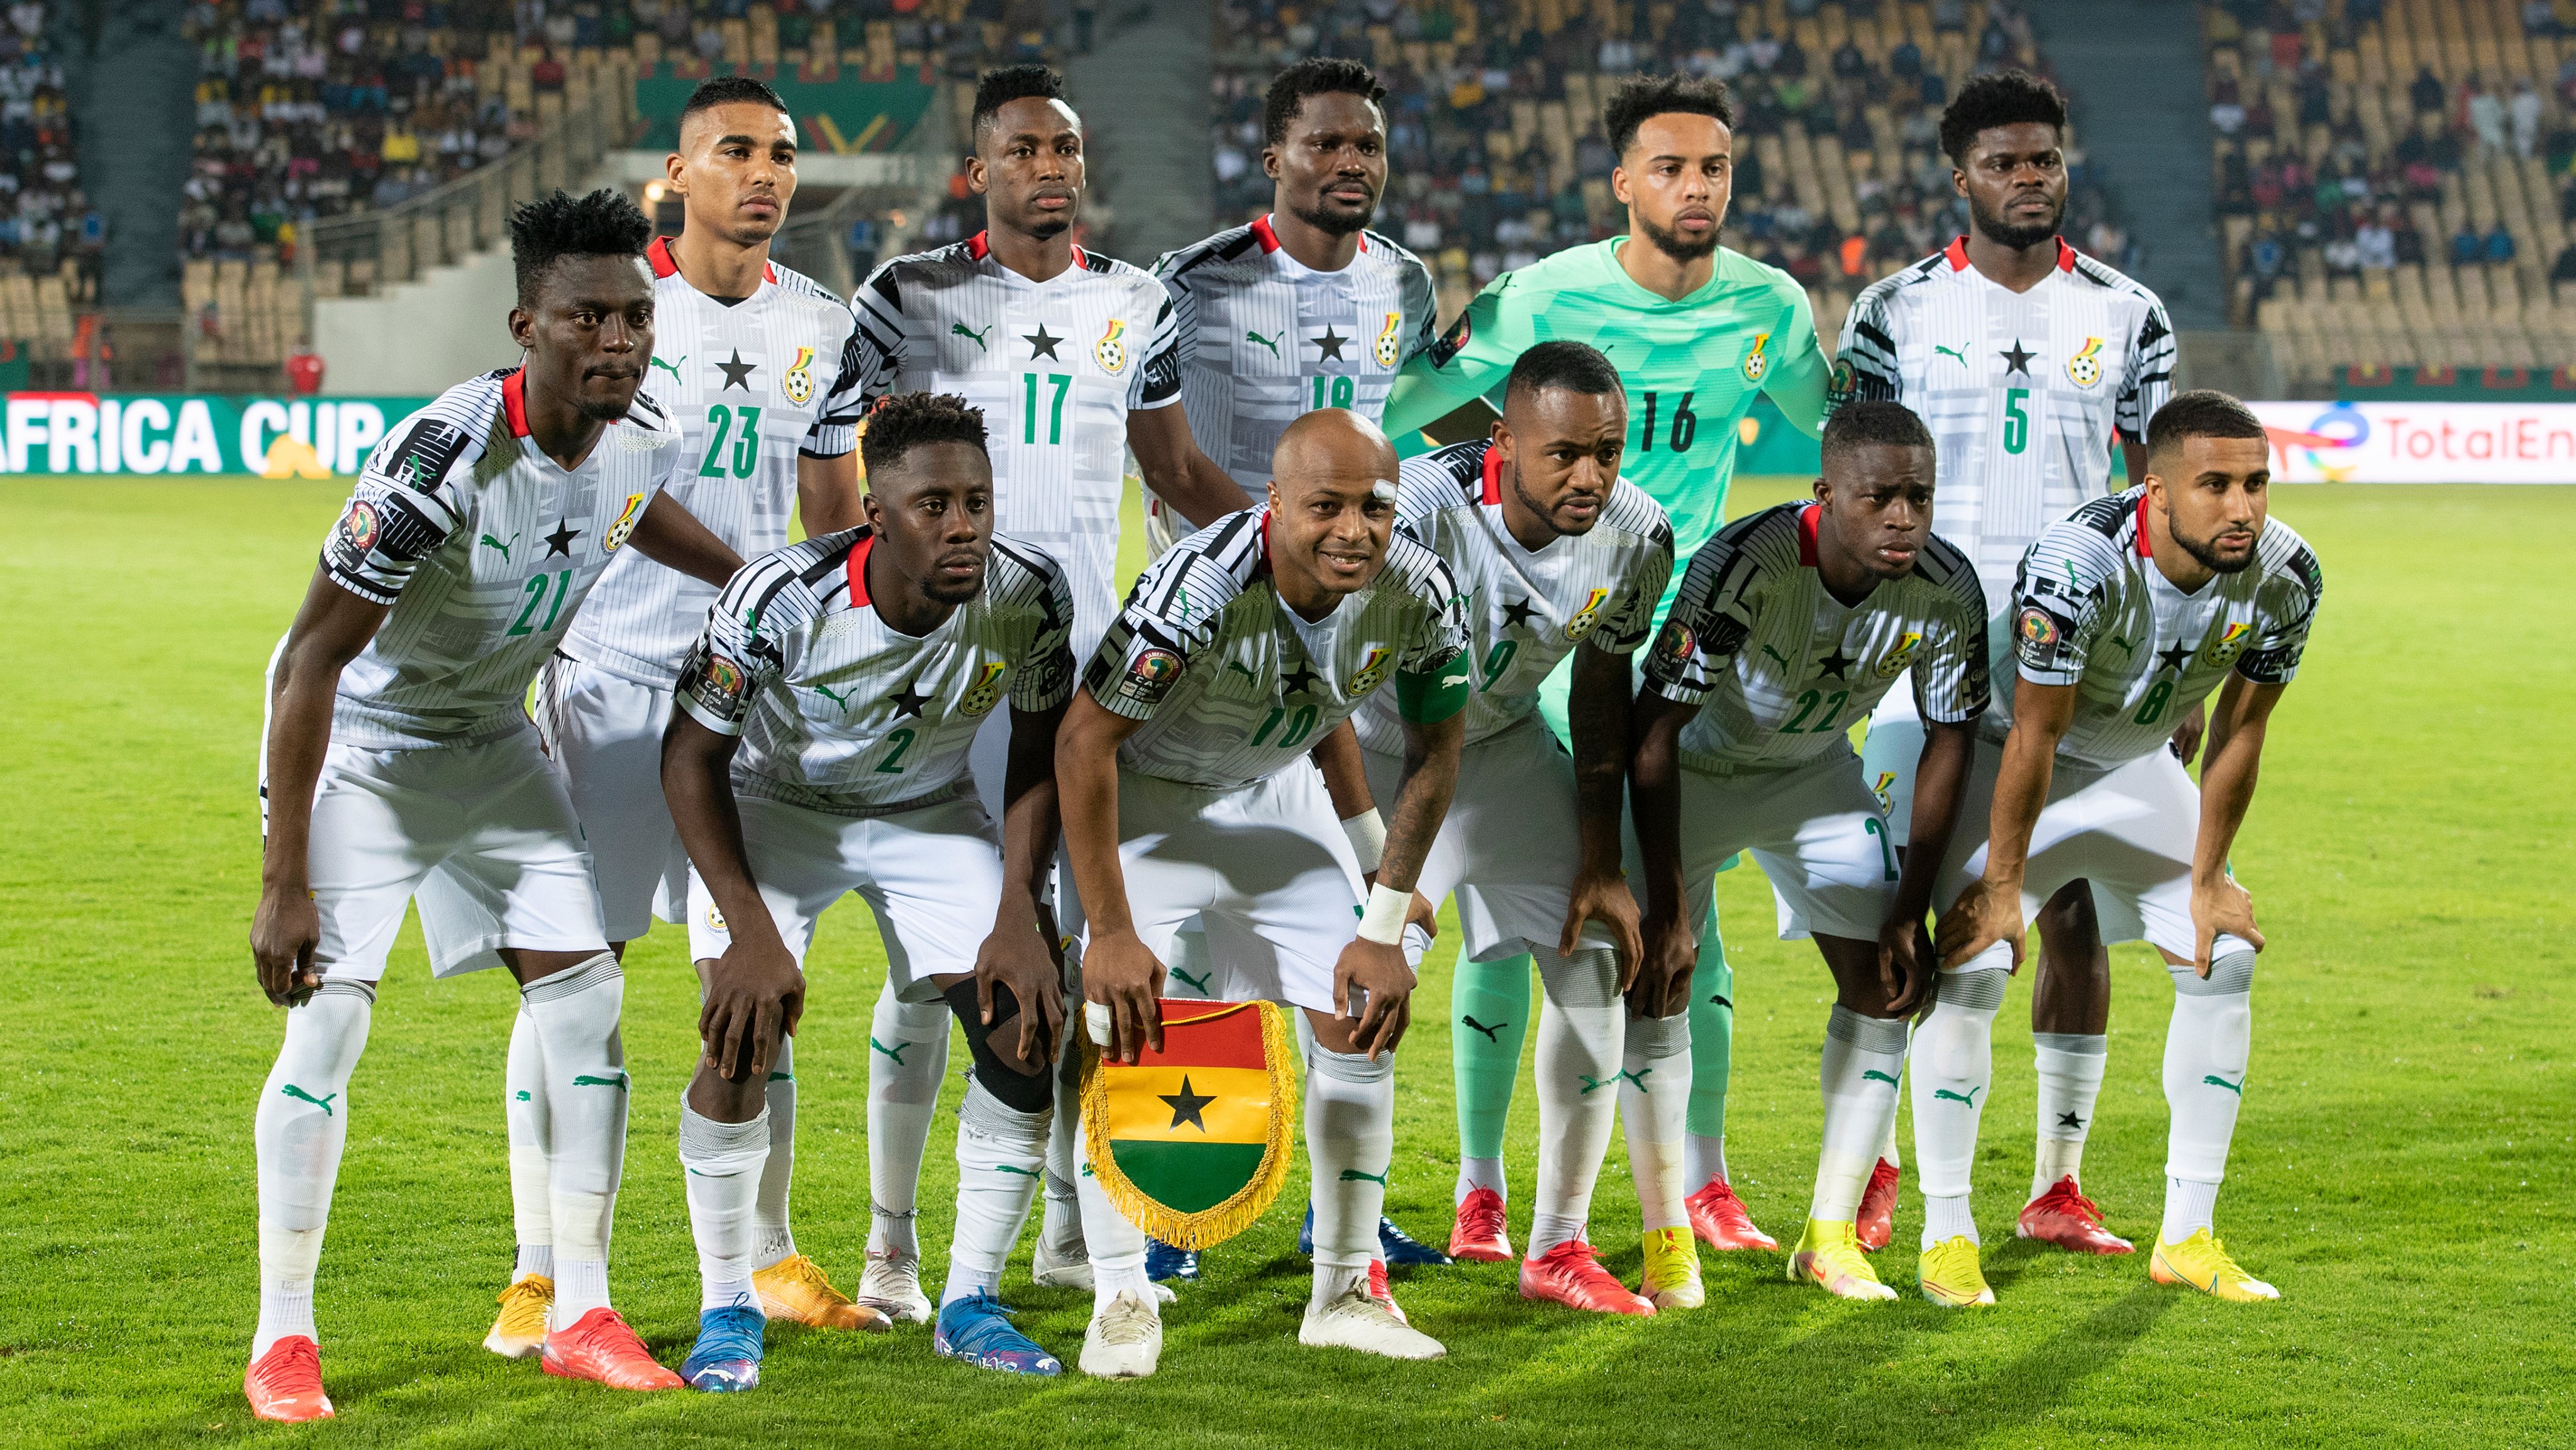 Gabon vs. Ghana - Group C: African Cup of Nations 2021